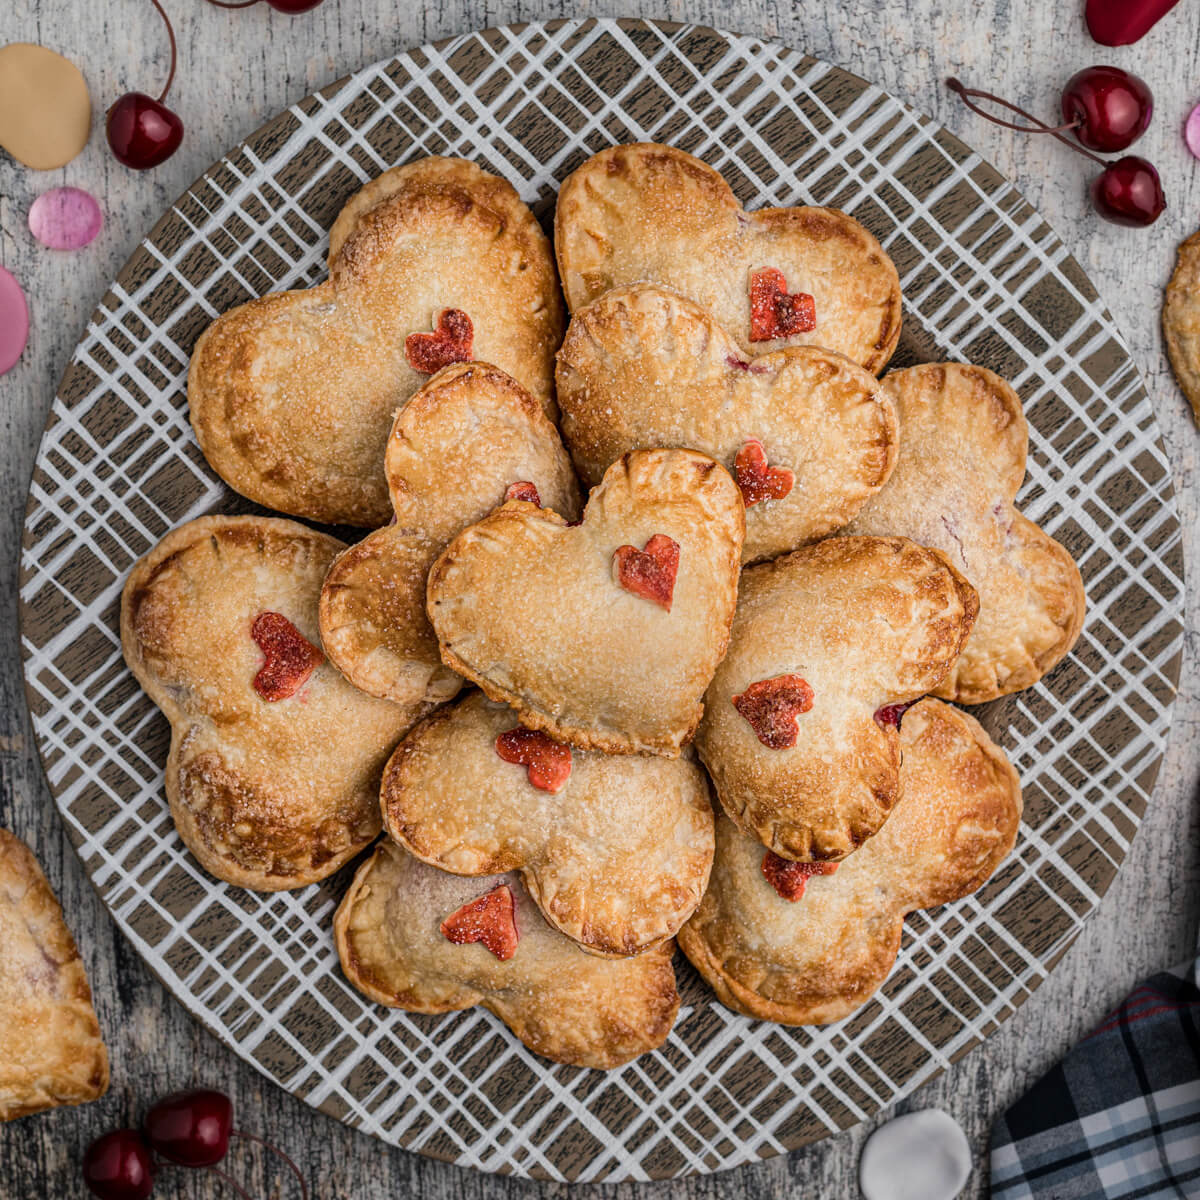 A plate full of golden baked heart shaped individual cherry hand pies decorated with red pastry hearts.